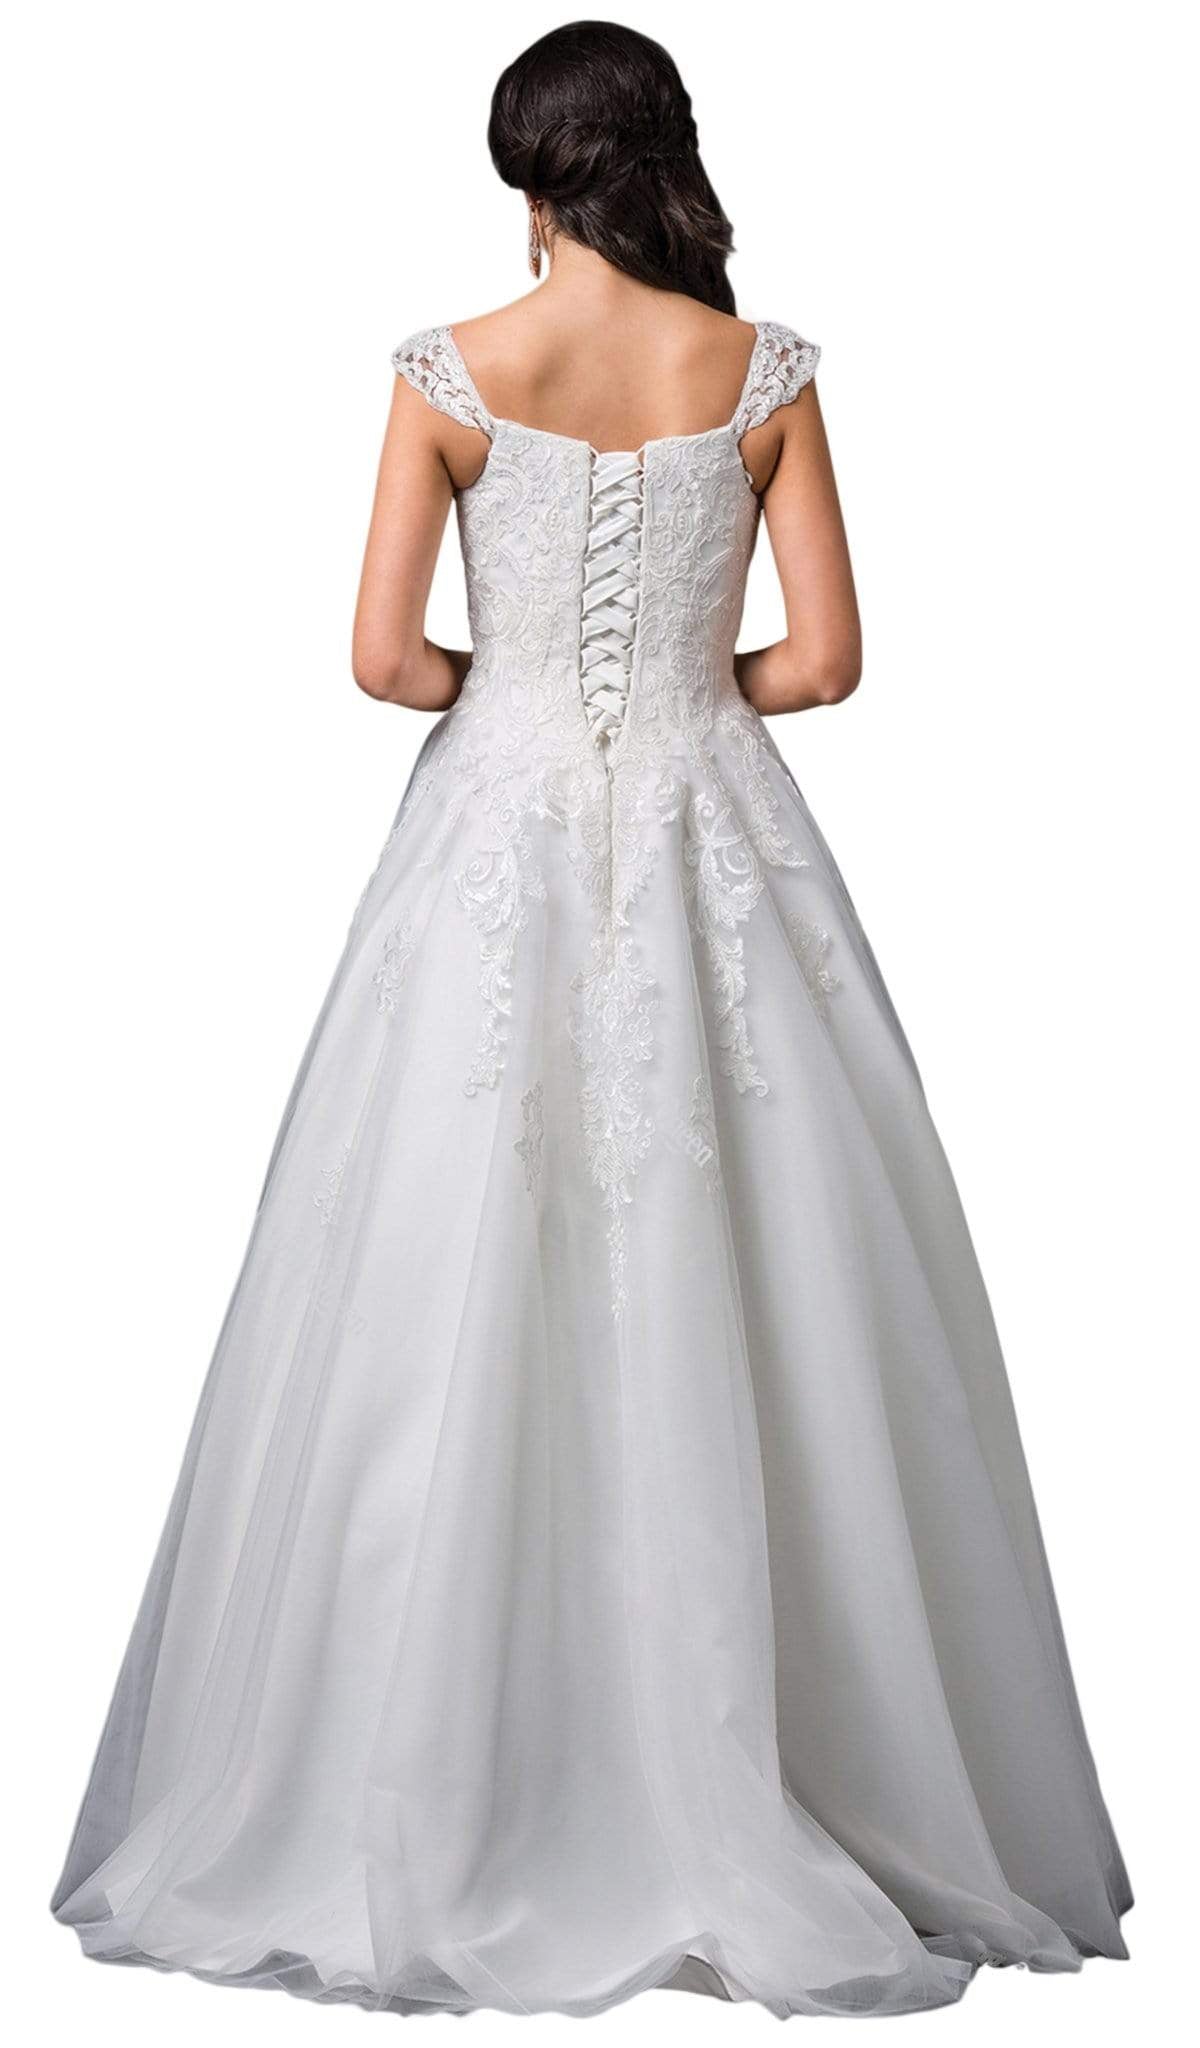 Dancing Queen Bridal - 99 Sleeveless Lace Sweetheart Ballgown Special Occasion Dress